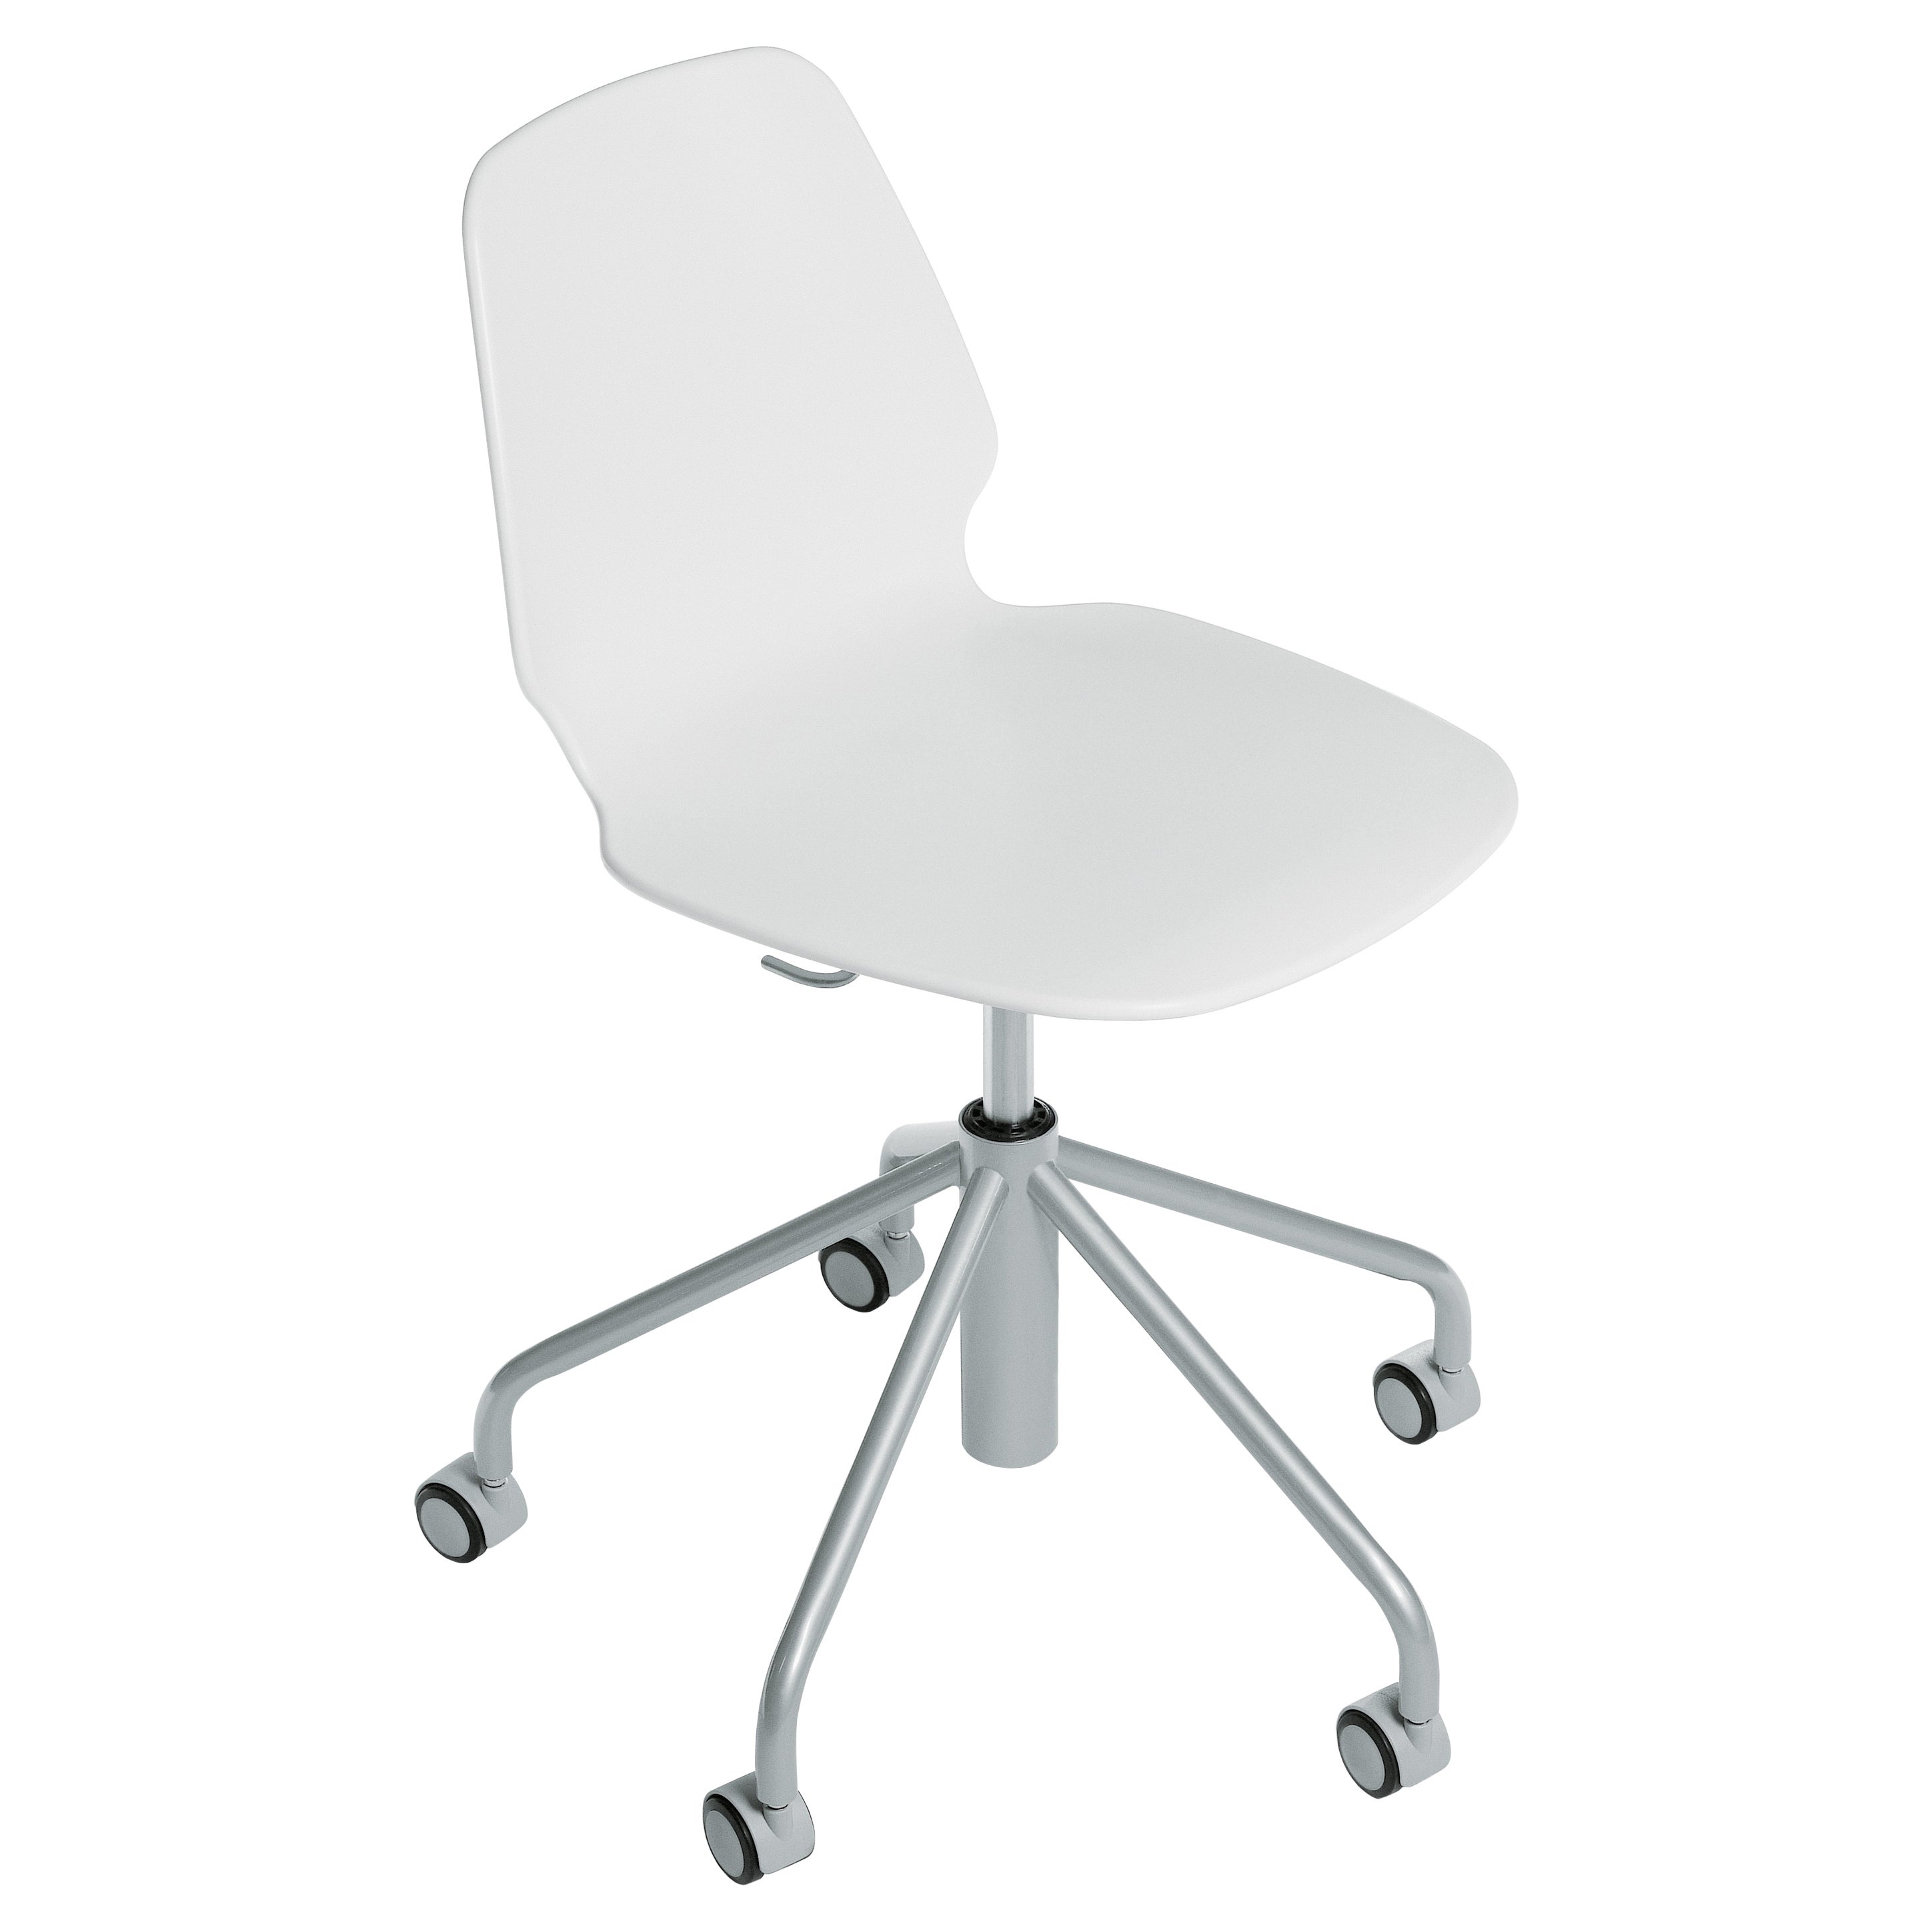 Alias 538 Selinunte Studio Chair in White Seat and Light Grey Steel Frame